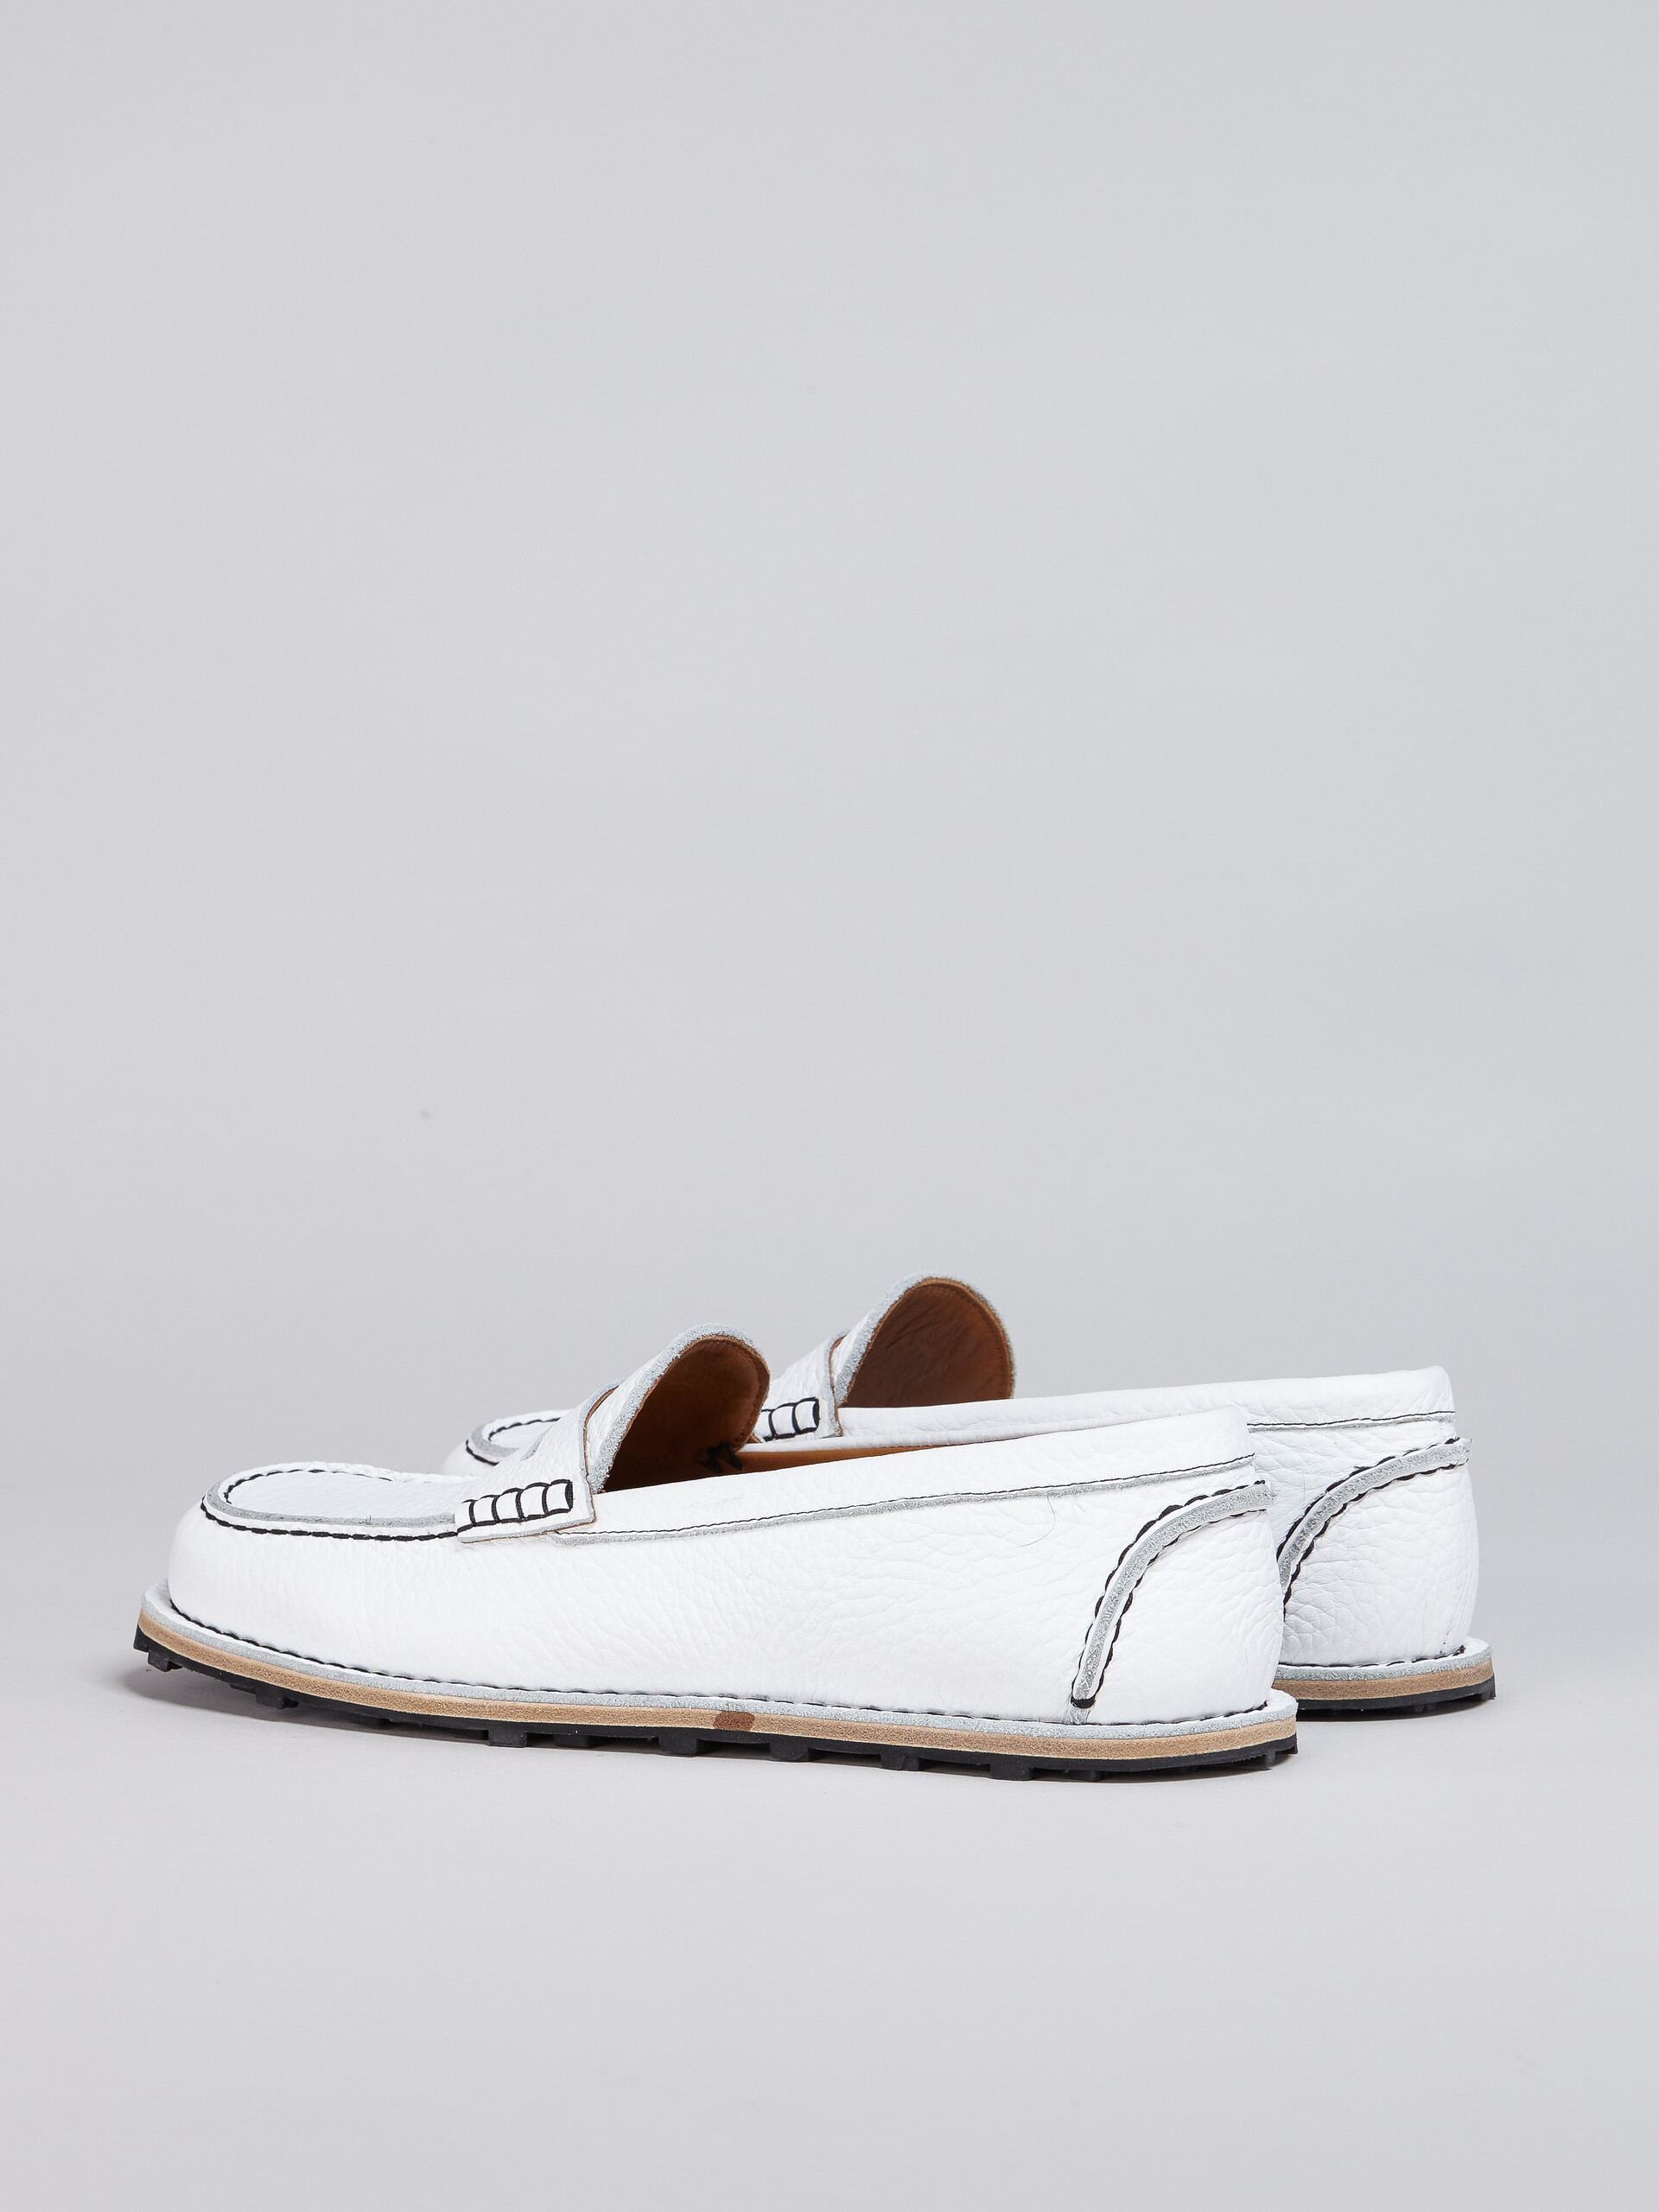 Grained calf leather moccasin - Mocassin - Image 3